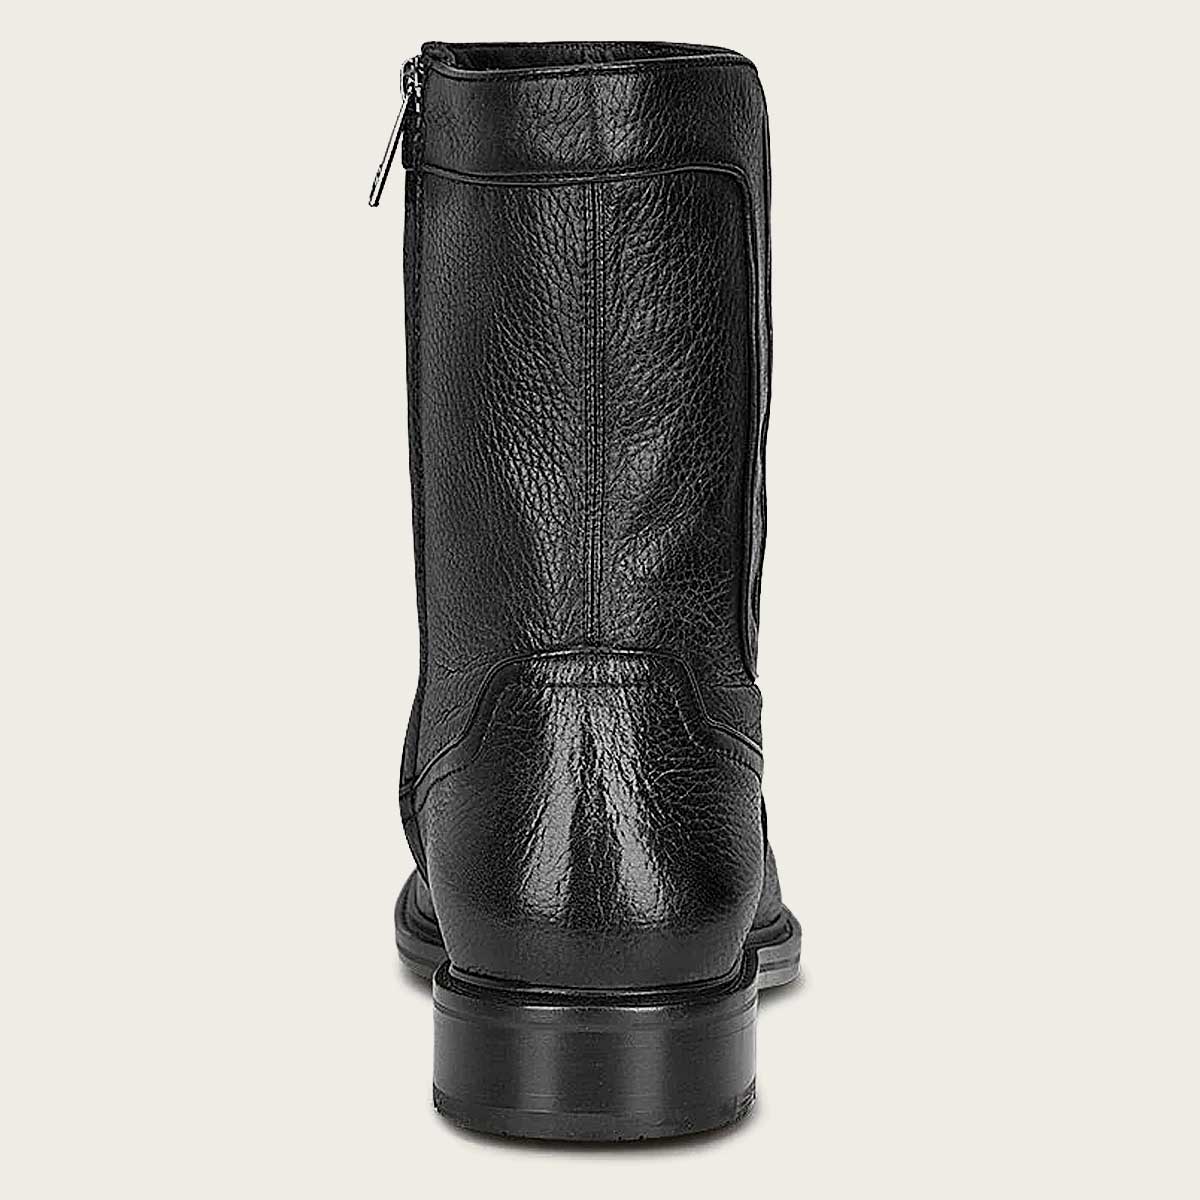 black hand-painted leather dress boot